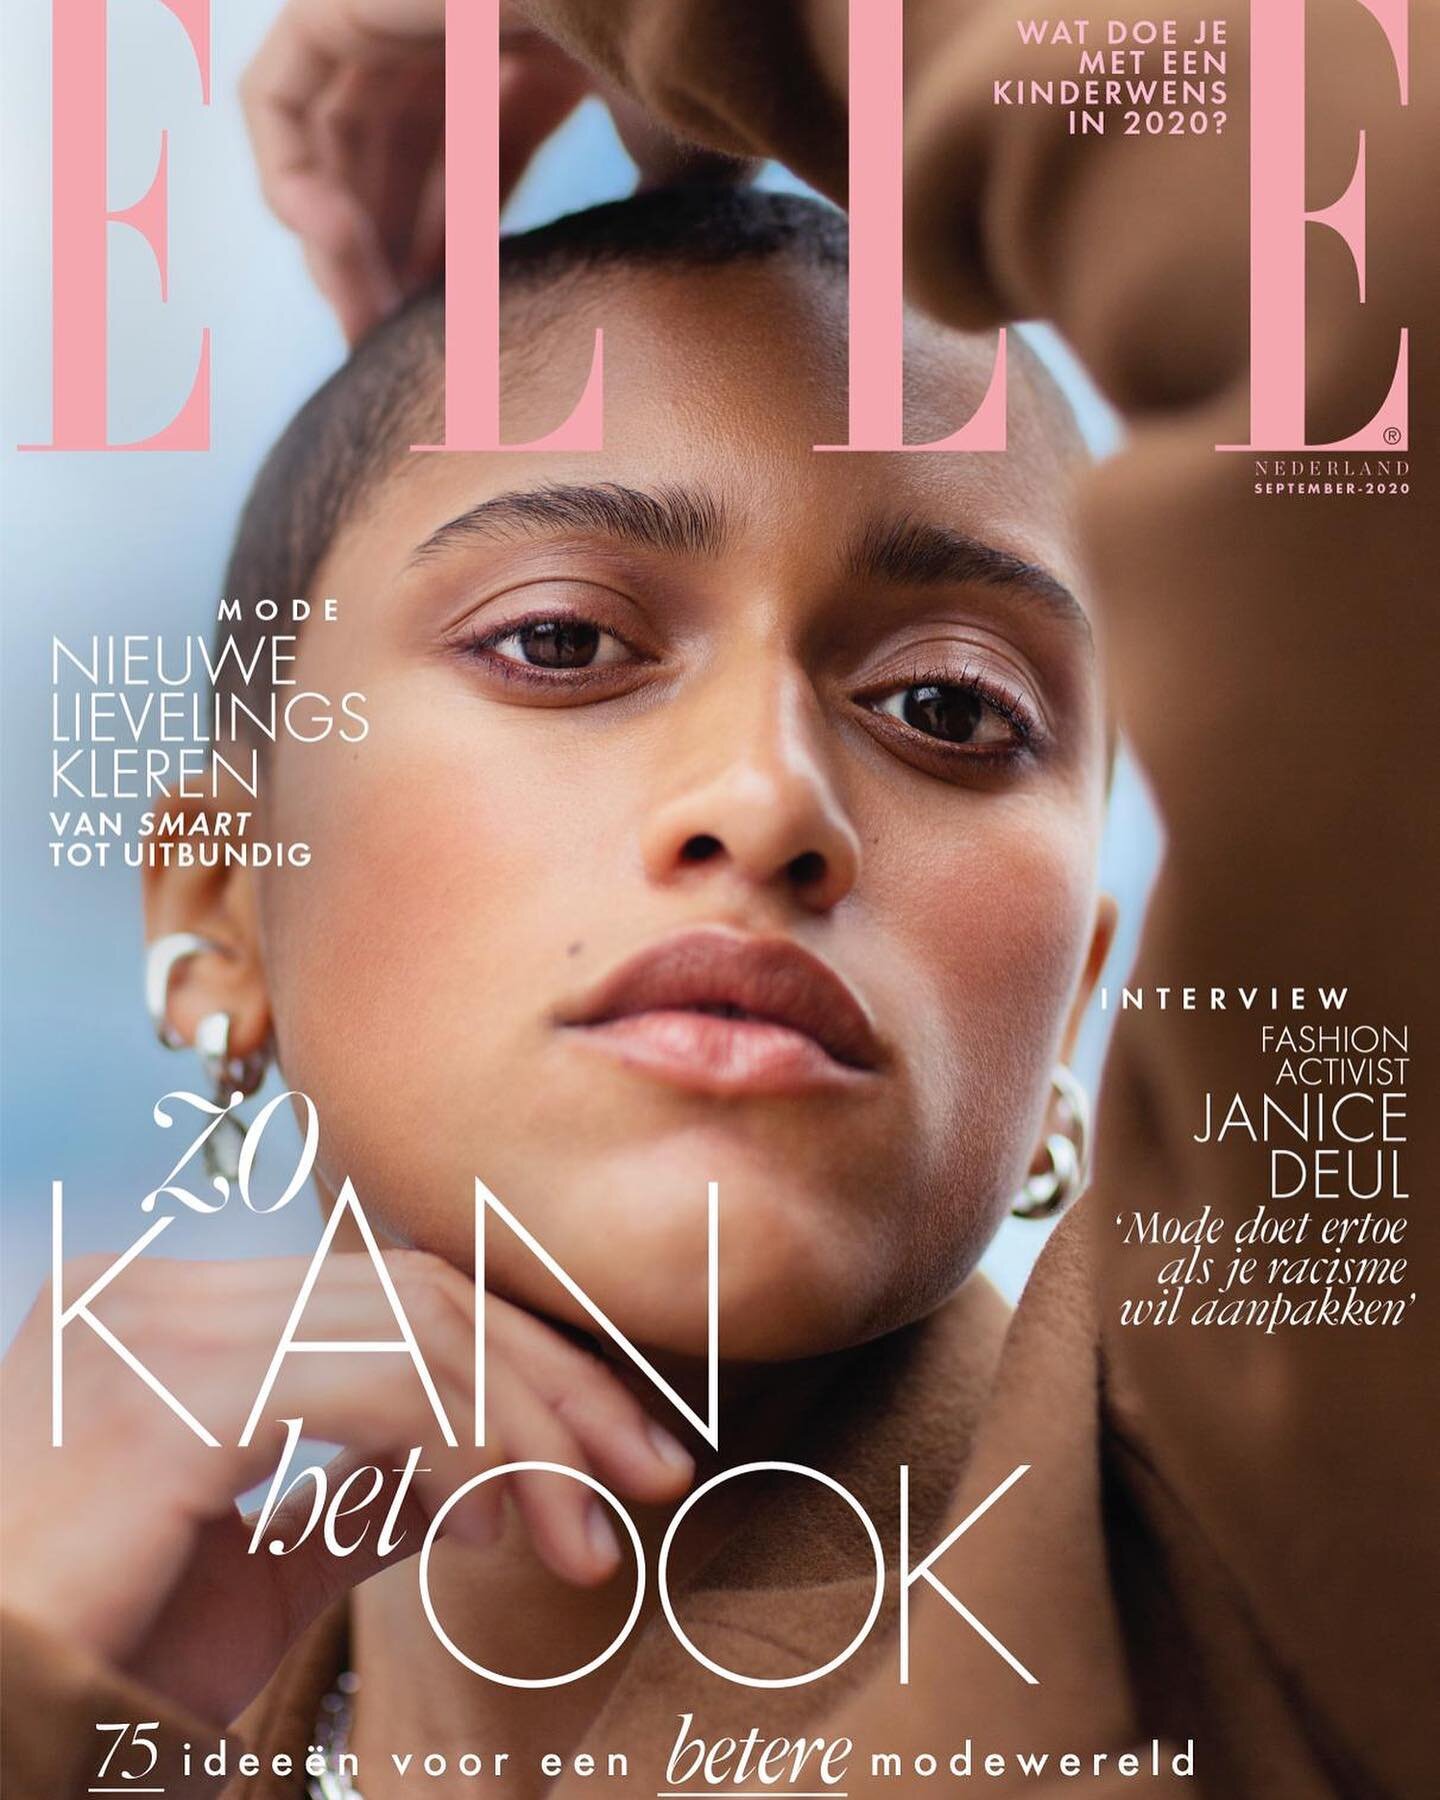 Yee Paa!!!
My work on the cover of ELLE&rsquo;s September issue⚡️⚡️⚡️

A big shout out to the awesome team
Model 👸🏾@blvck_saida
Styling @esther_coppoolse 
Hair &amp; Make-up @anitajolles

And an extra big thank you for @esther_coppoolse for giving 